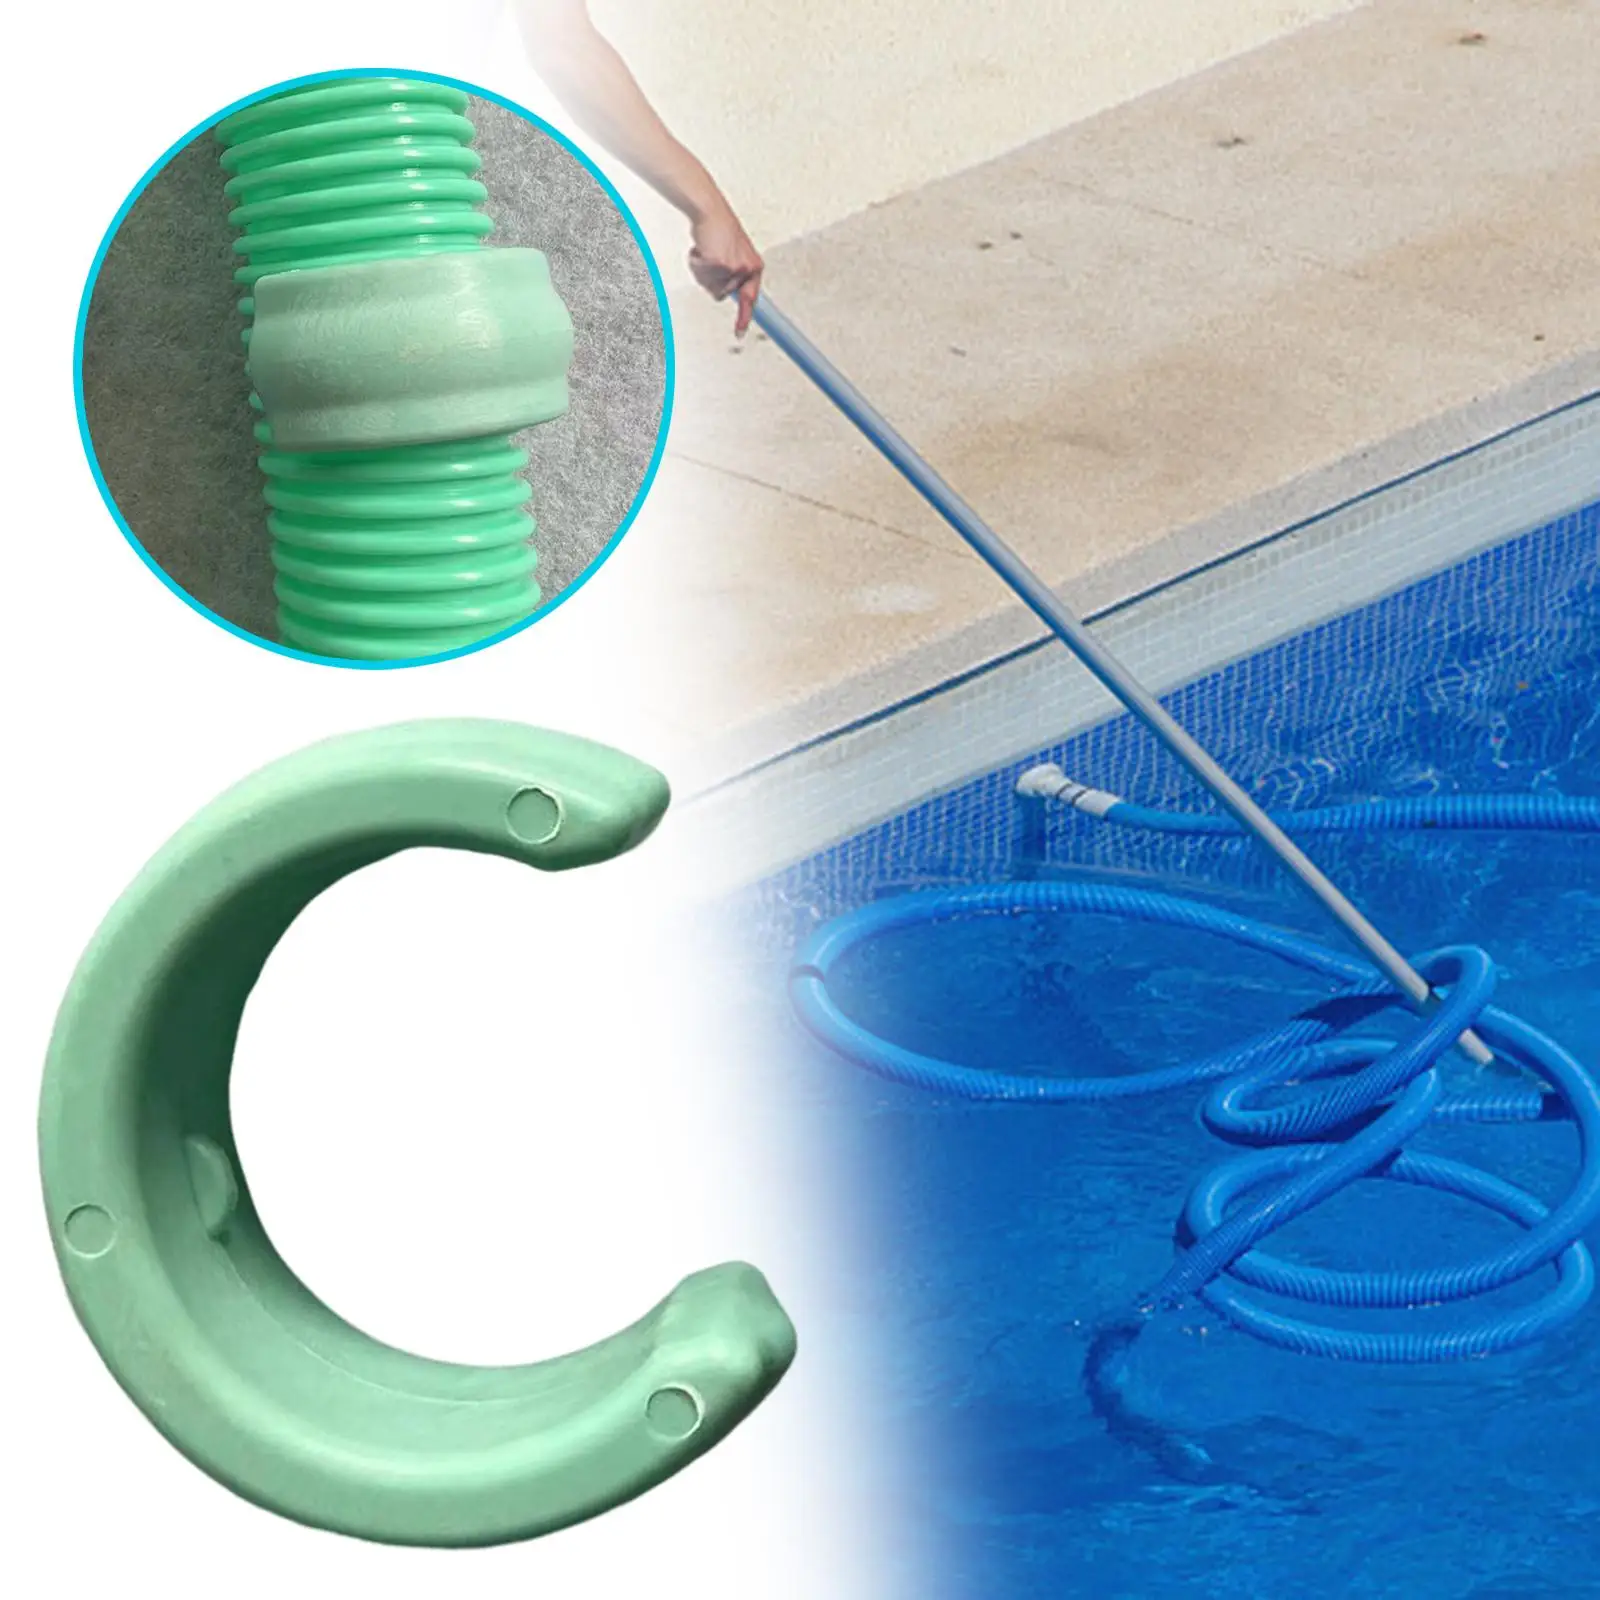 Pool Hose Weight for W83247 Replace Accessory Exquisite Easy to Use Automatic Pool Cleaners Universal Pool Cleaner Hose Weight